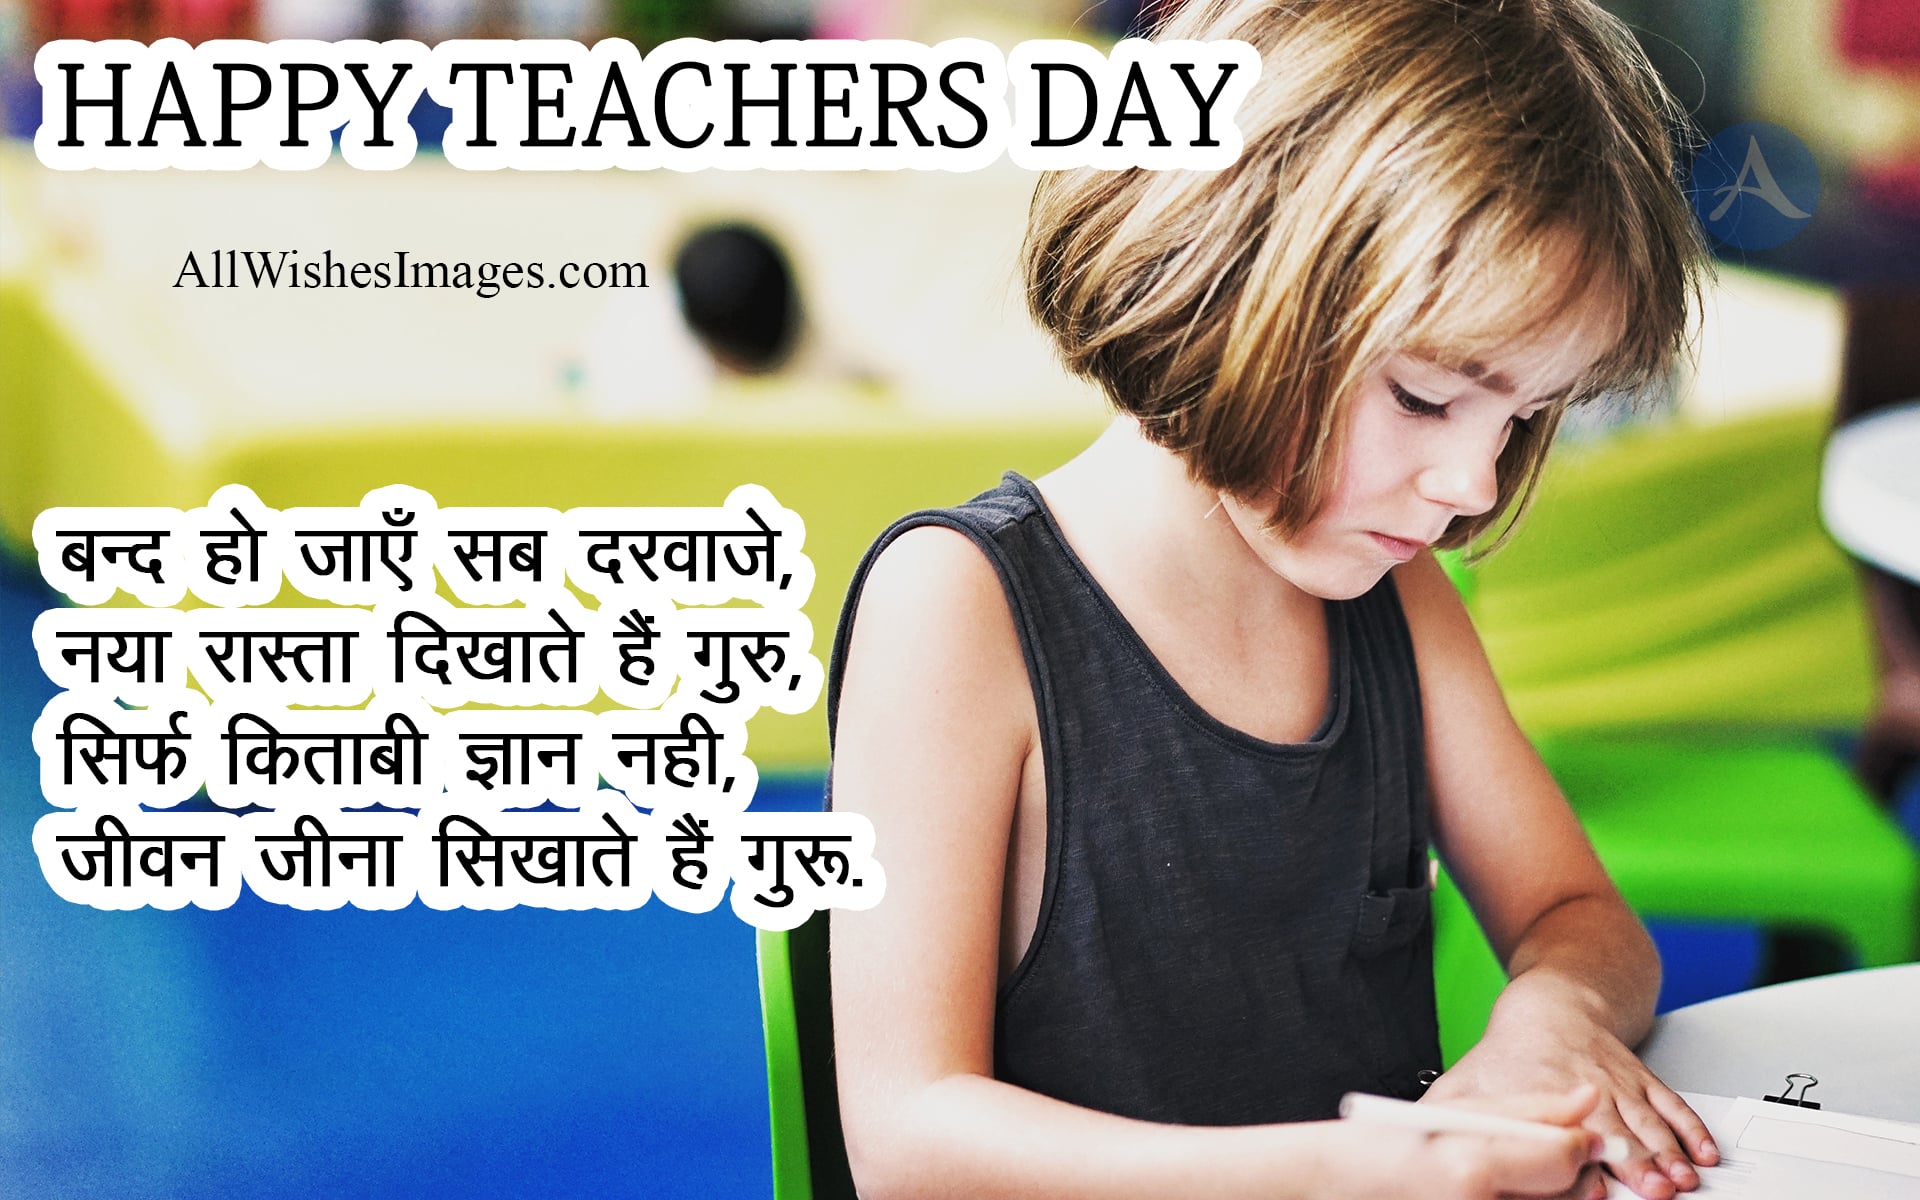 Teachers Day Special - All Wishes Images - Images for WhatsApp